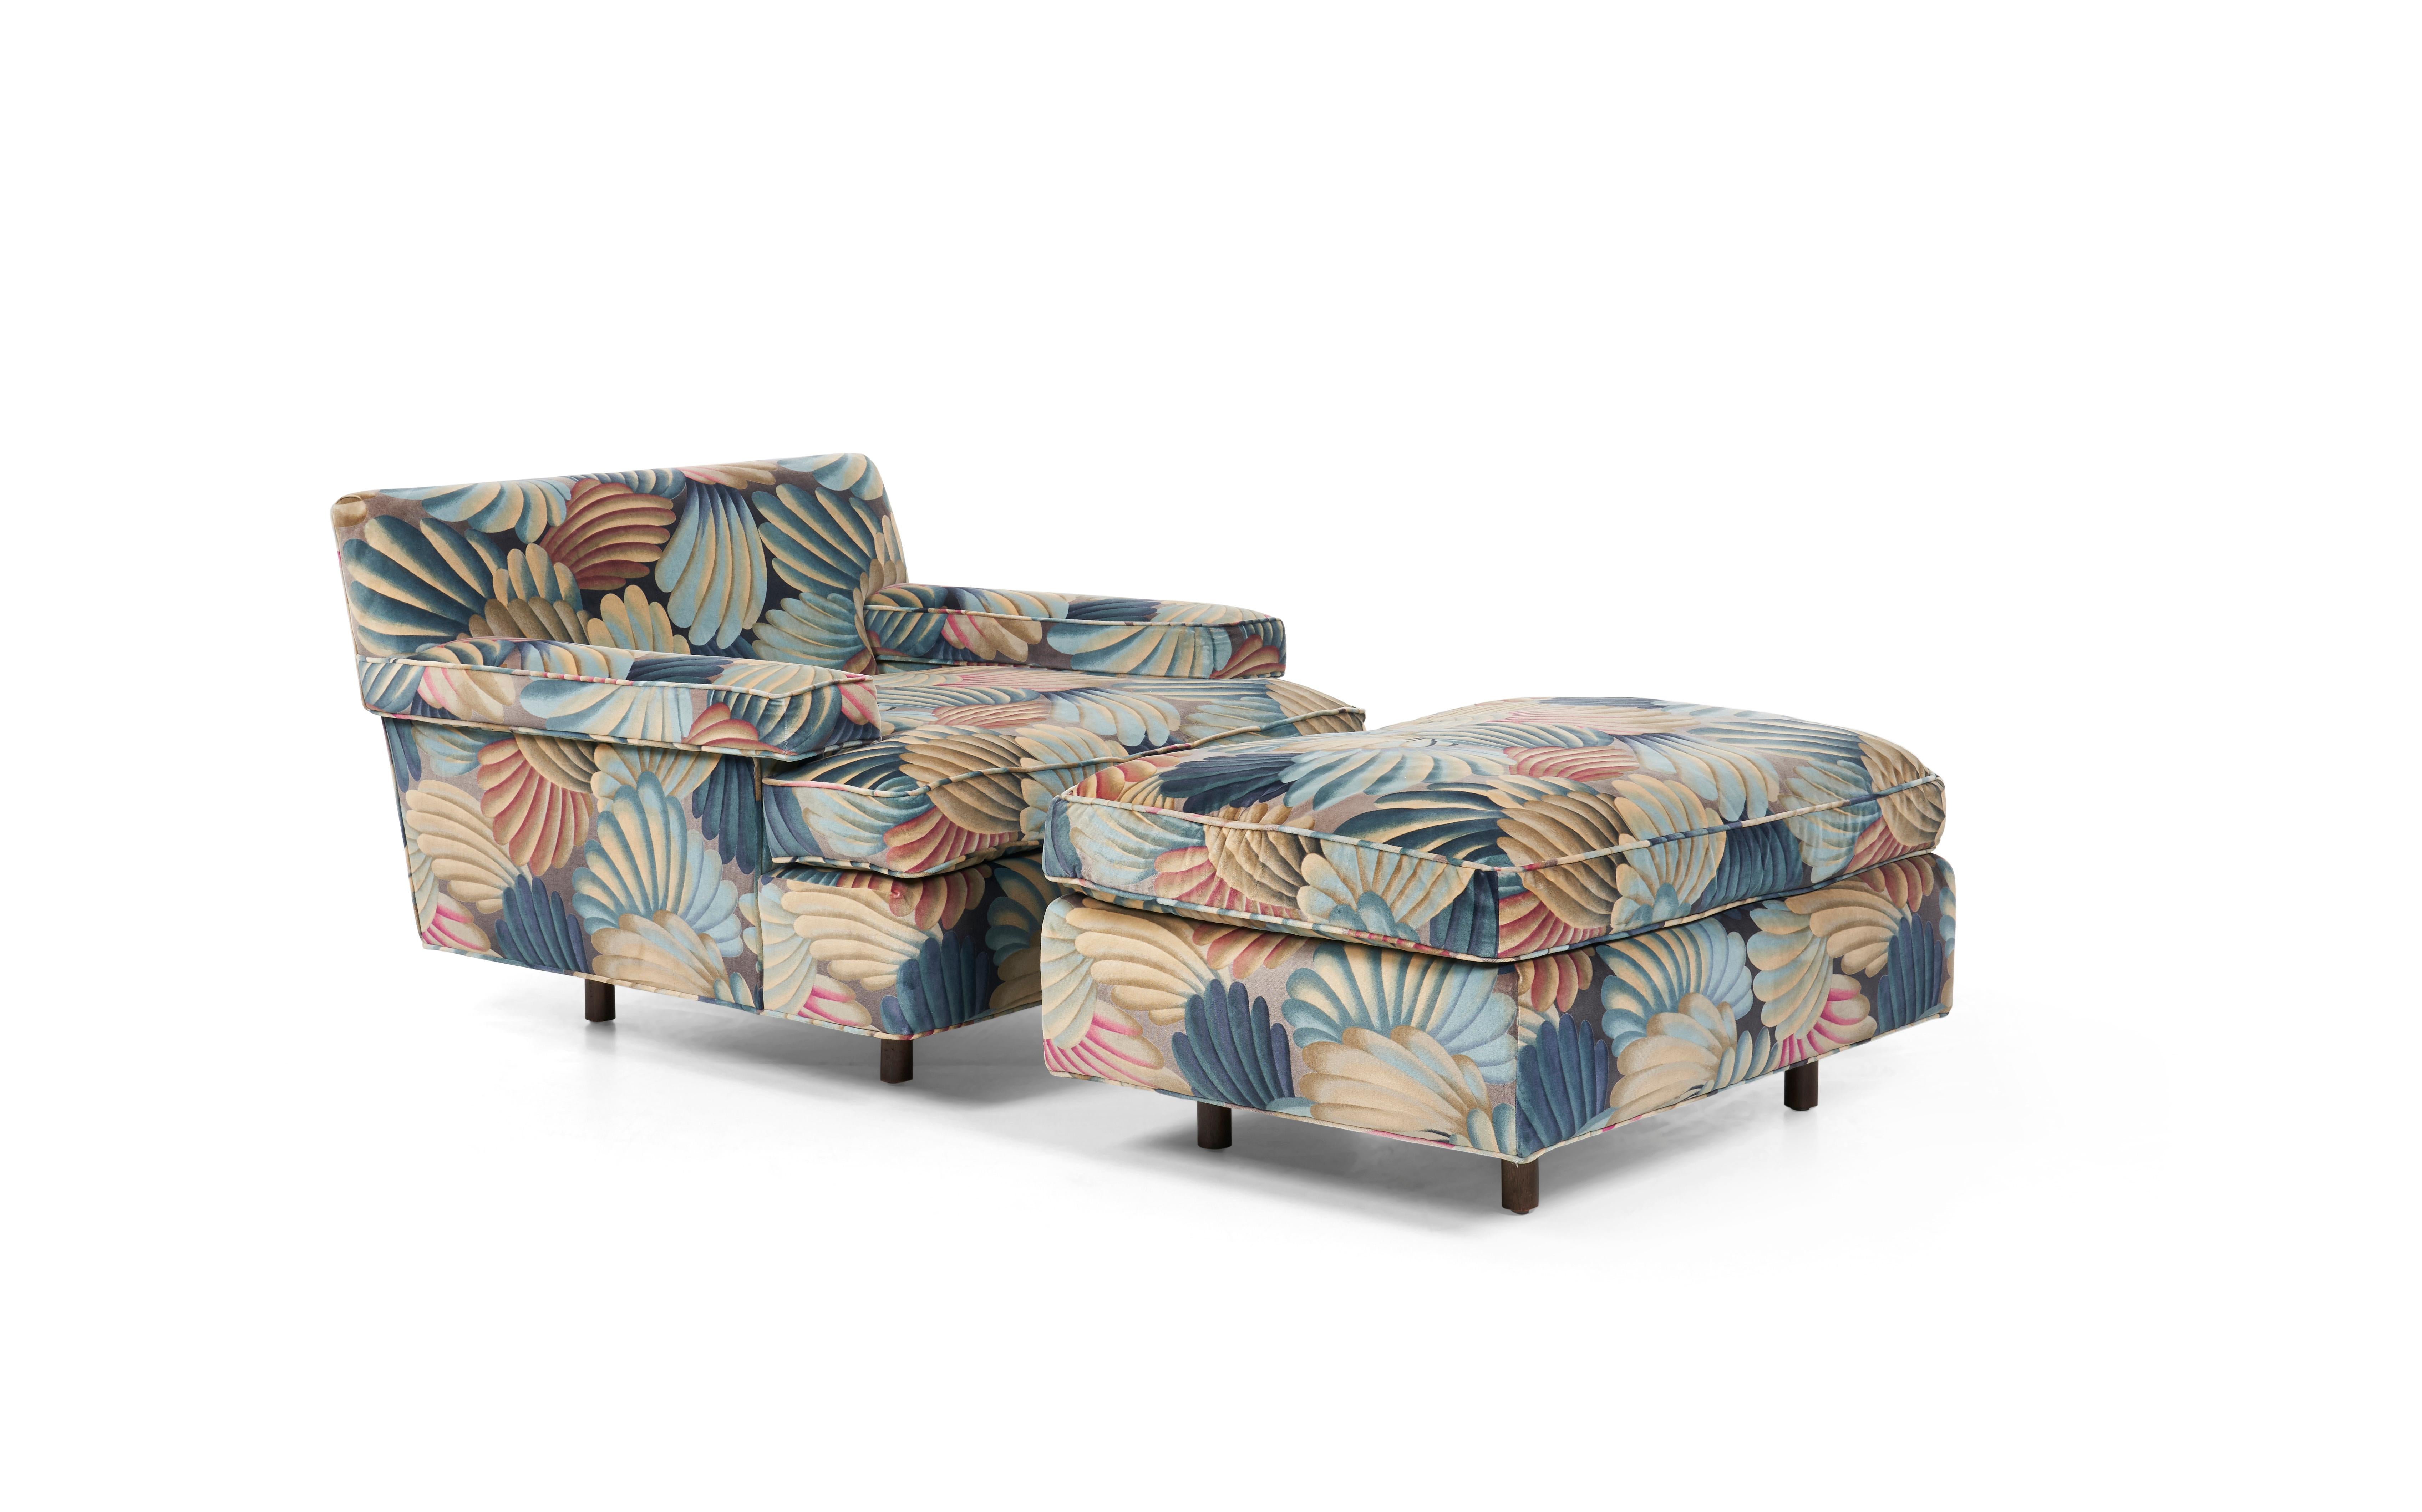 Probber for Probber Inc. Lounge chair and ottoman, custom ordered original cotton velvet upholstery by Jack Lenor Larsen fabric.
Highly skilled upholstery work; well thought-out executed with continuous patterns flow off and on all angles of each